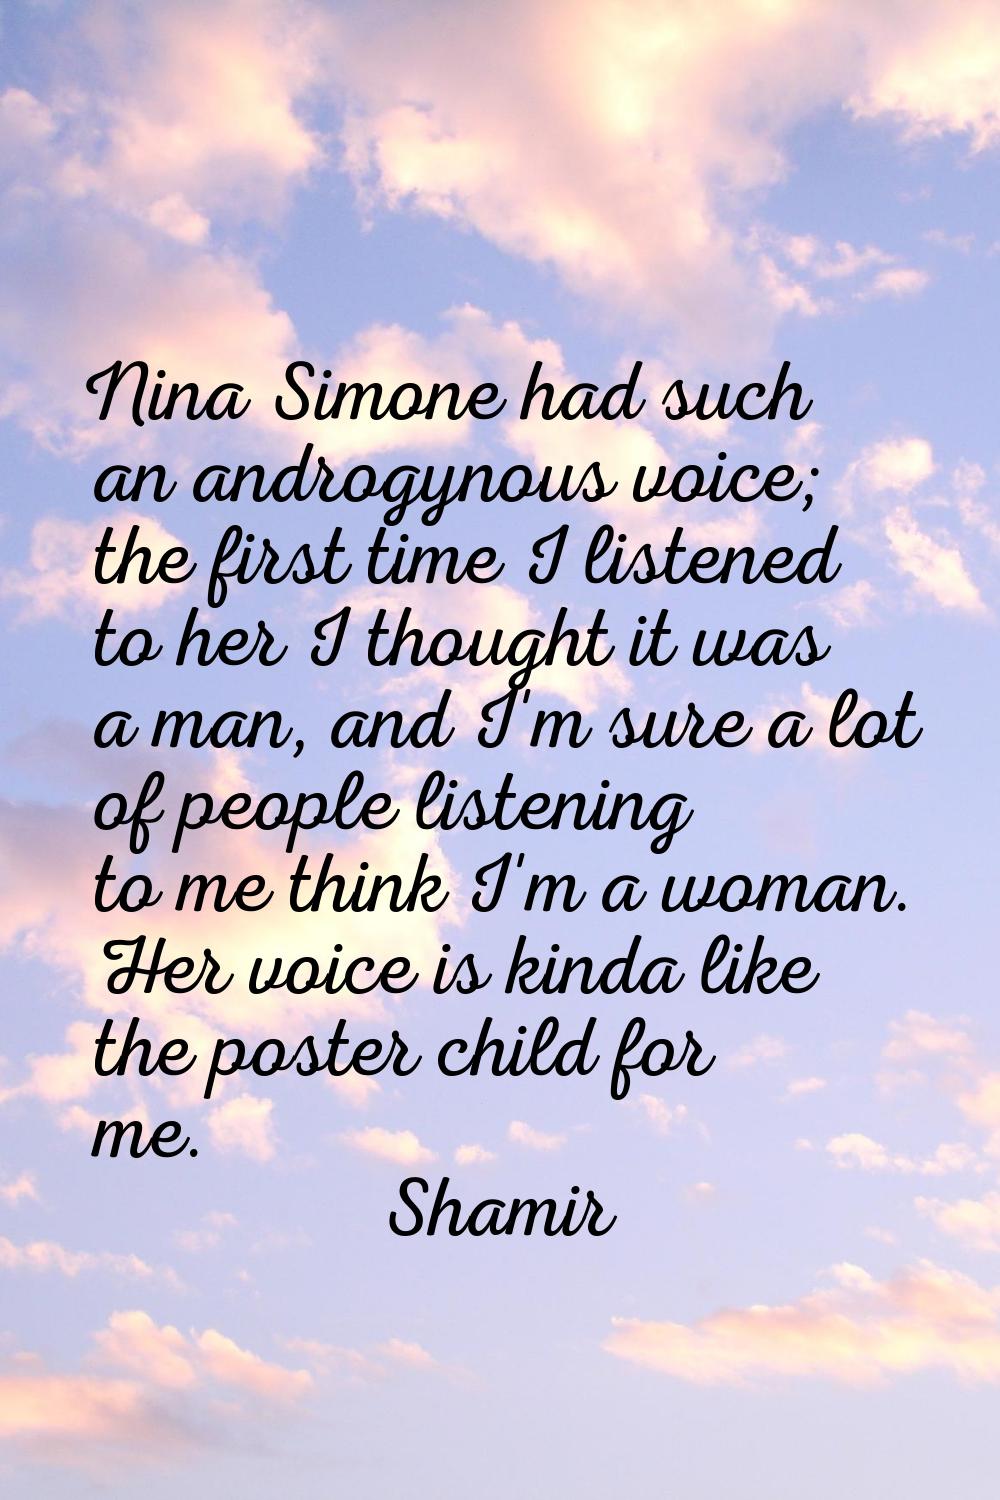 Nina Simone had such an androgynous voice; the first time I listened to her I thought it was a man,